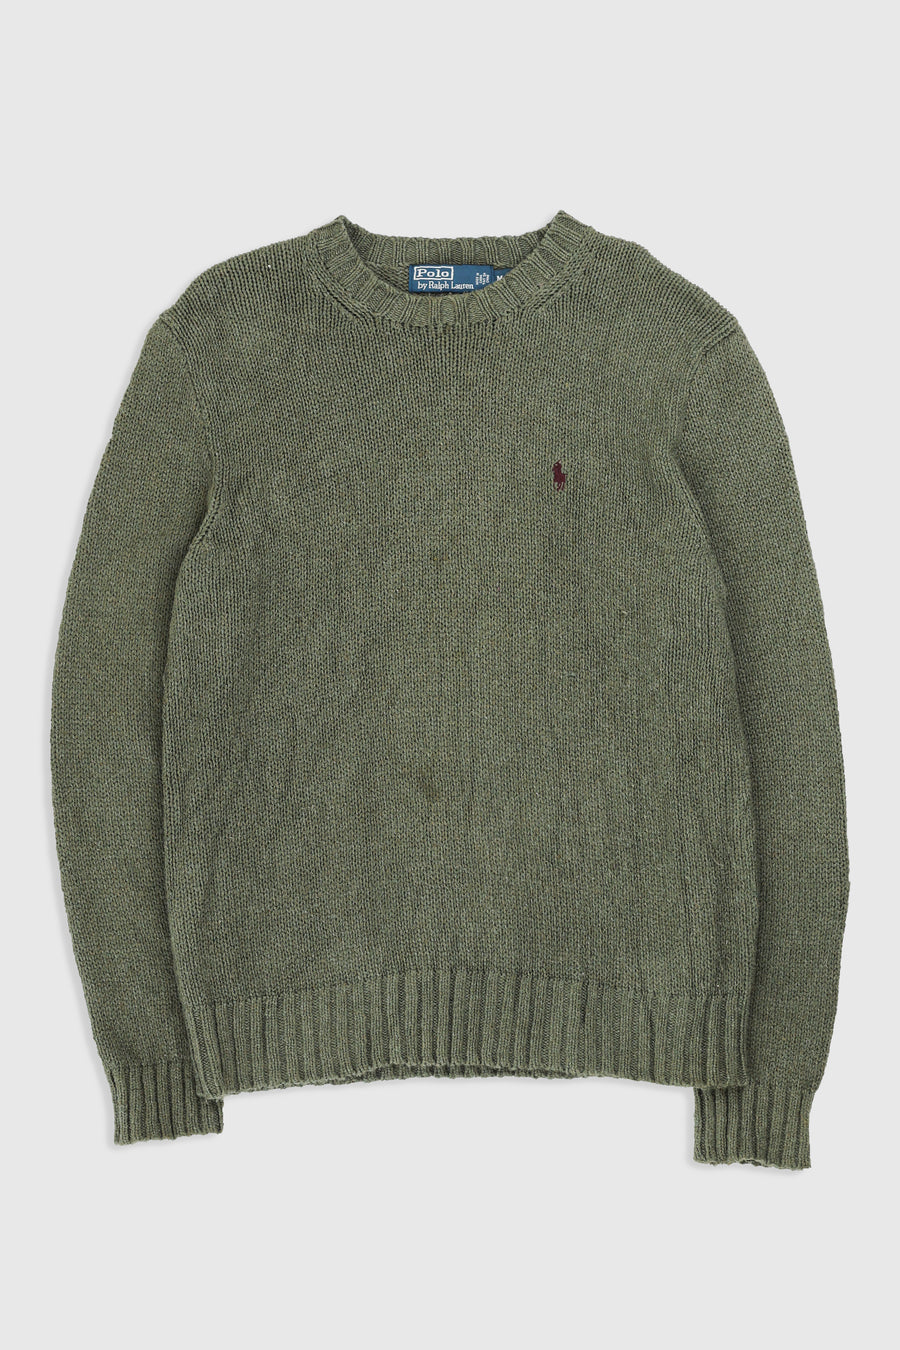 Vintage Polo Knit Sweater